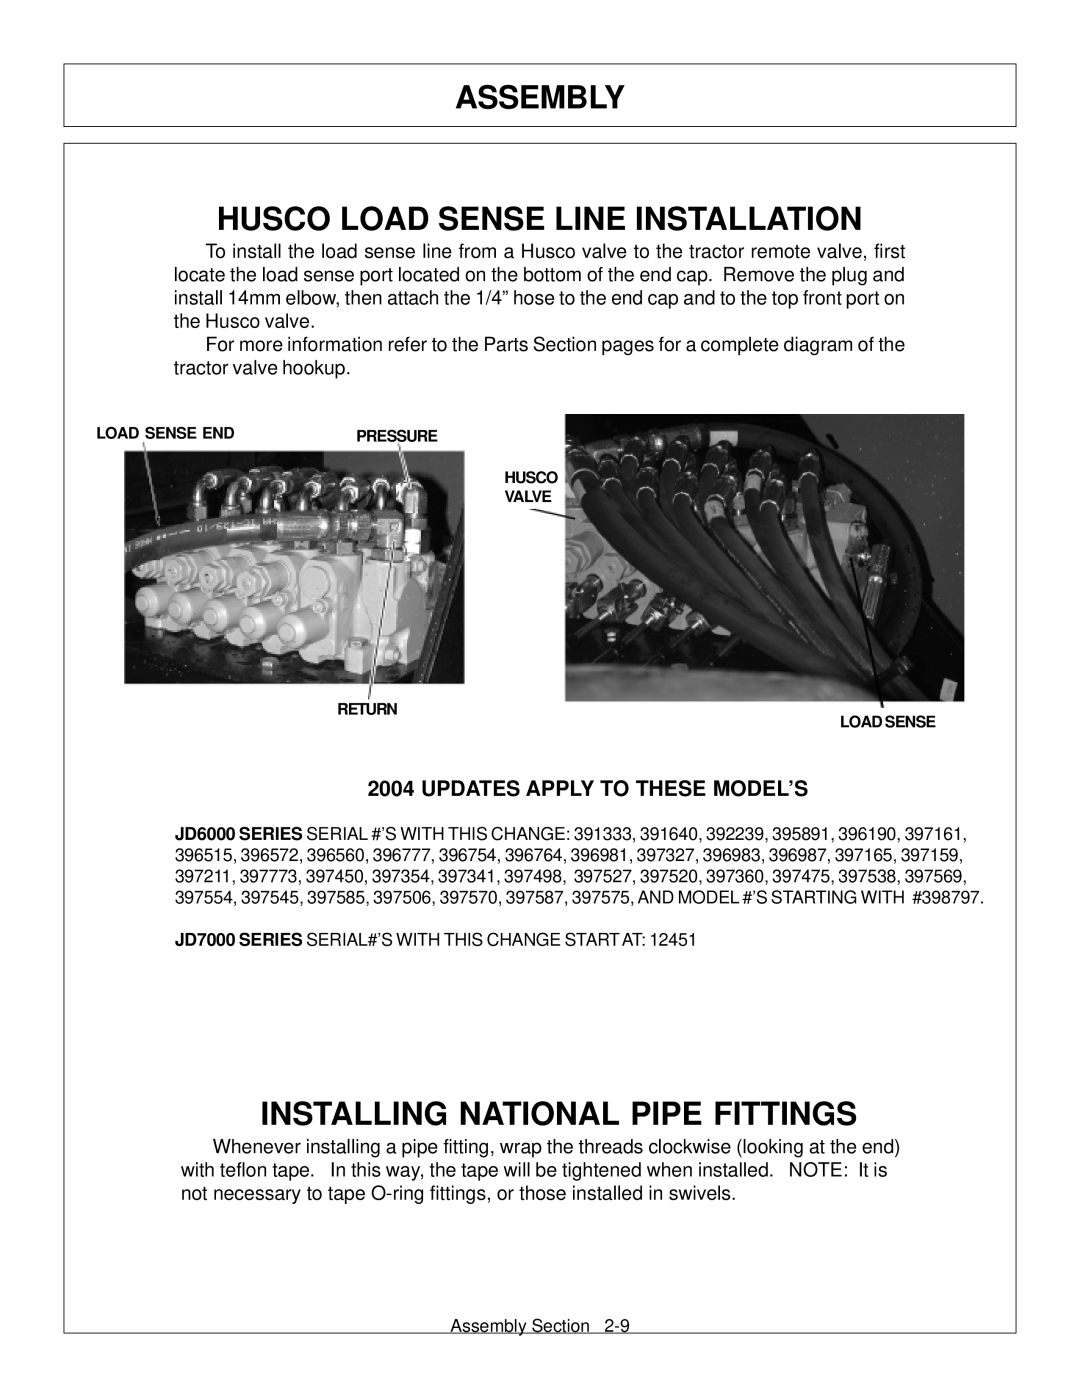 Tiger Products Co., Ltd JD 72-7520 manual Husco Load Sense Line Installation, Installing National Pipe Fittings, Assembly 